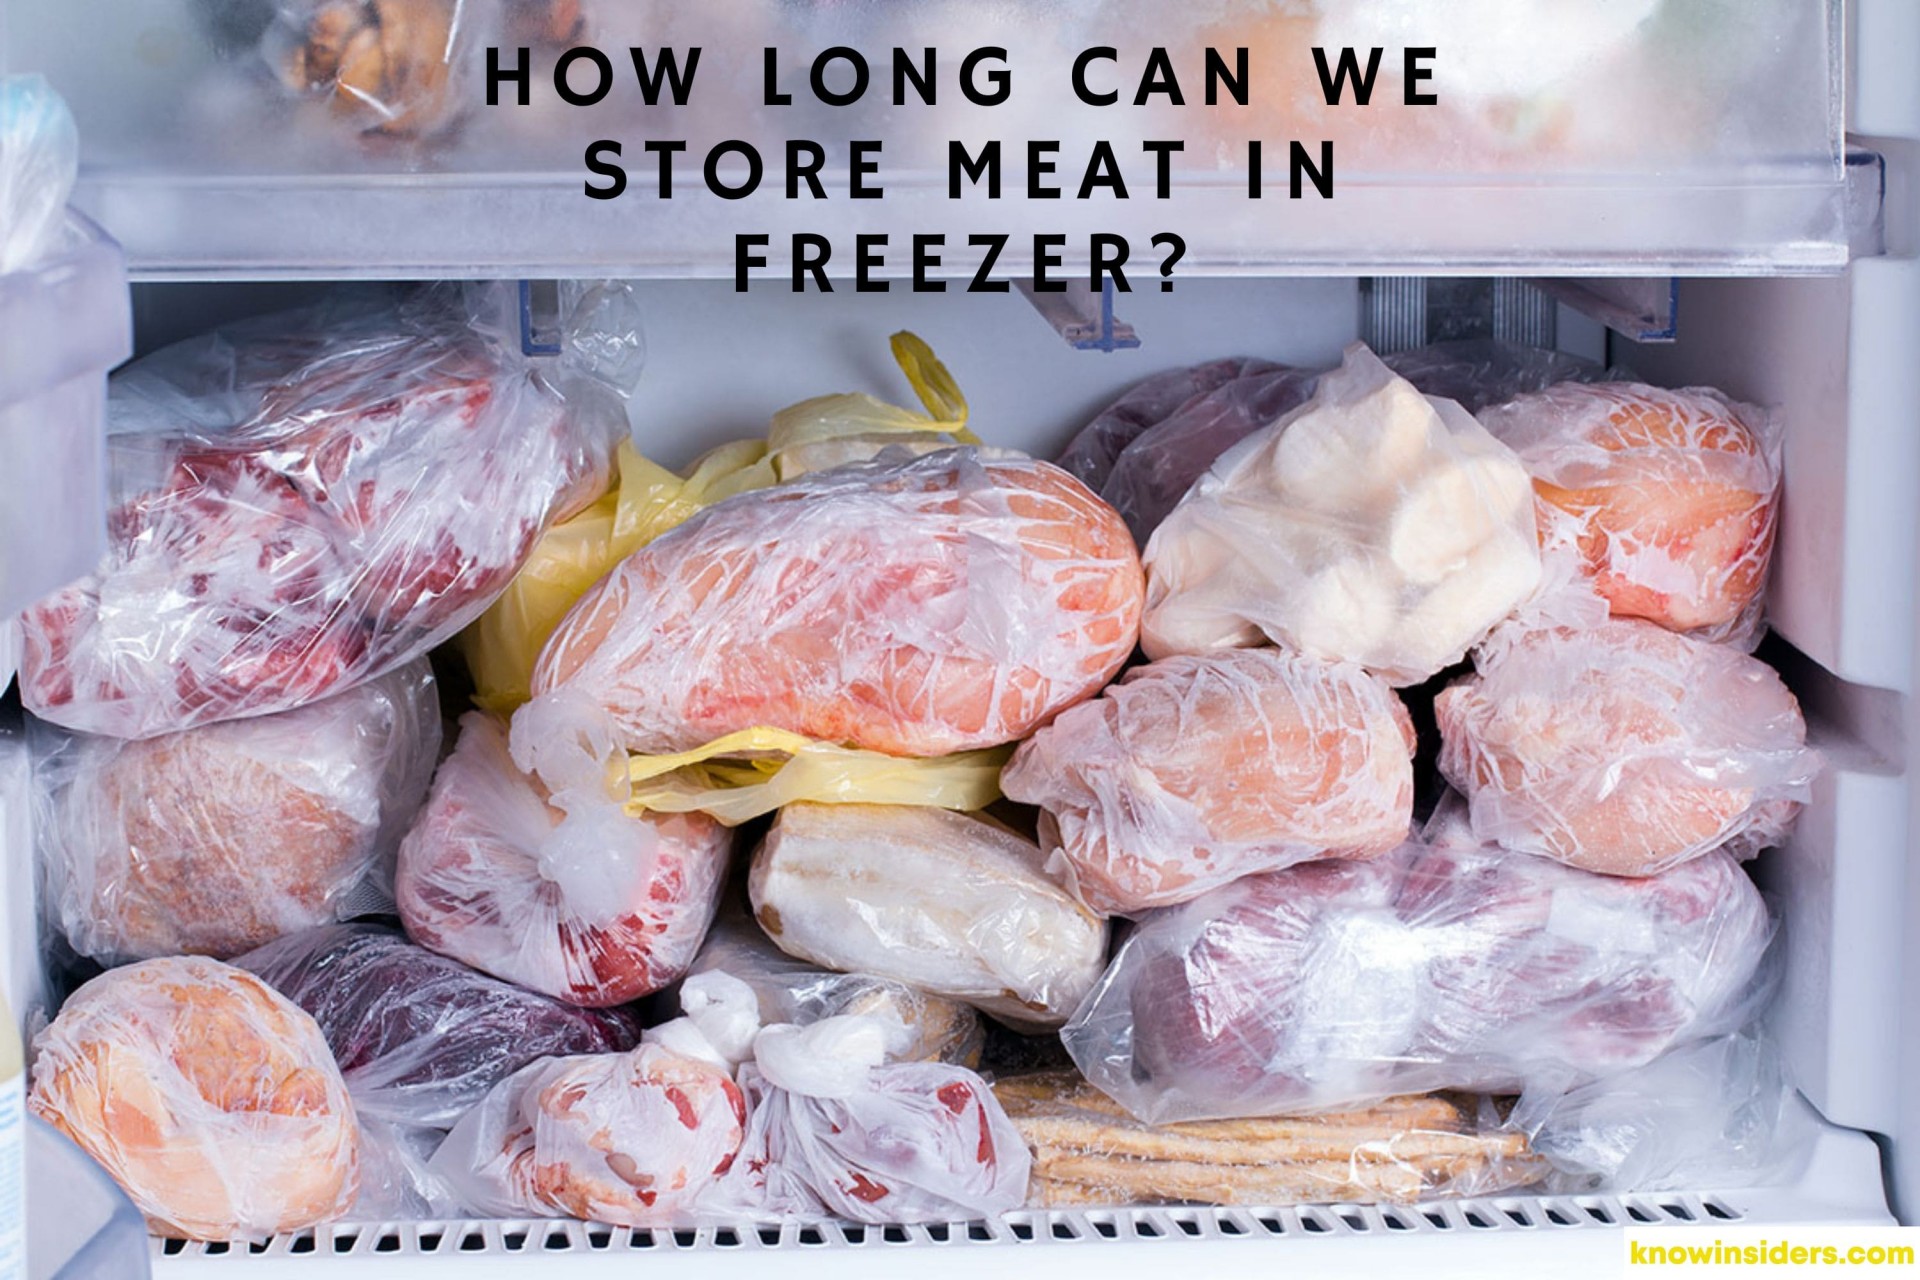 How Long Can We Store Meat In Freezer